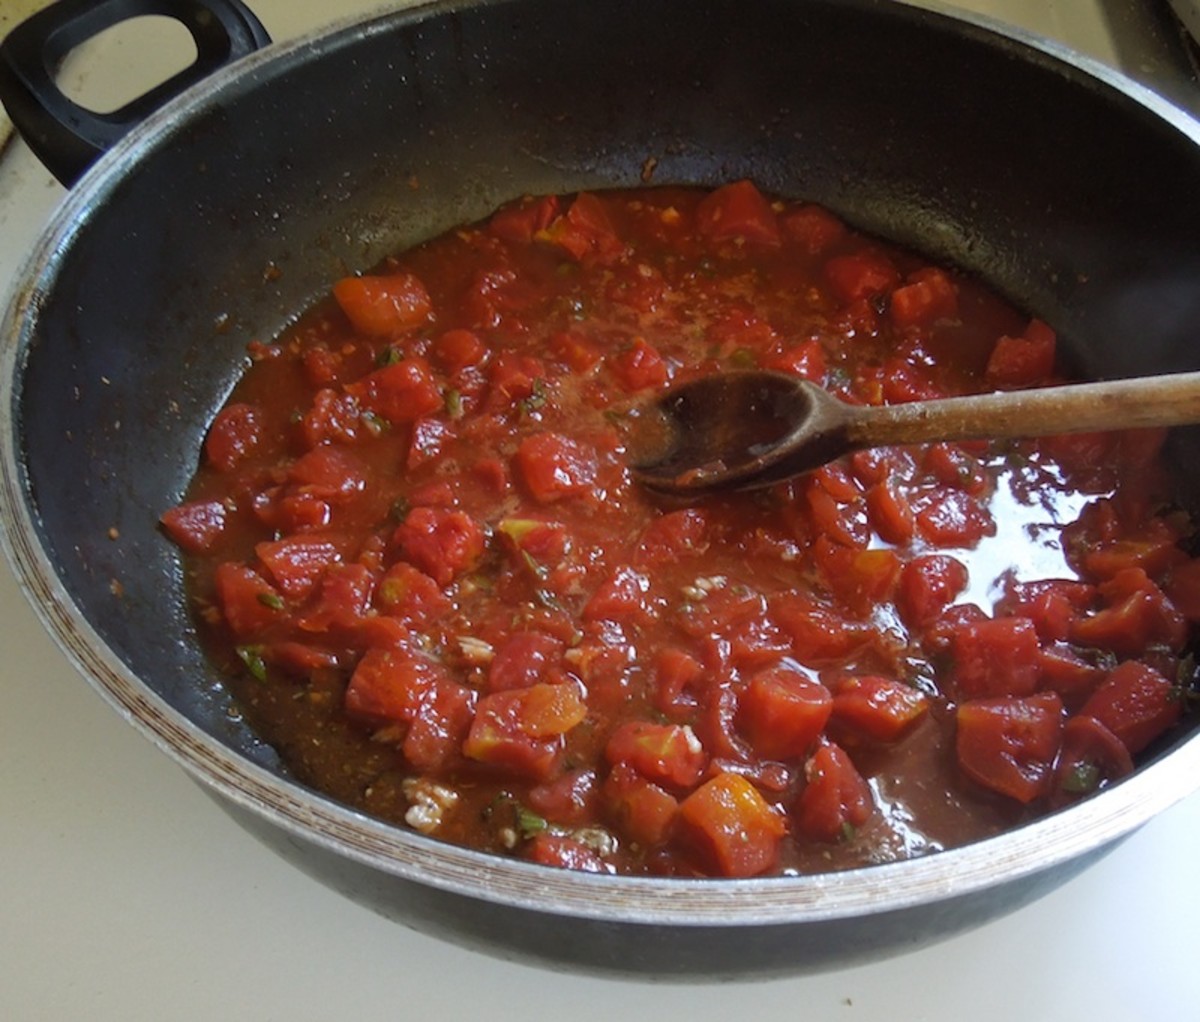 Cook and stir over medium-high heat. Mixture should be boiling. As it cooks it will thicken and lose liquid. 